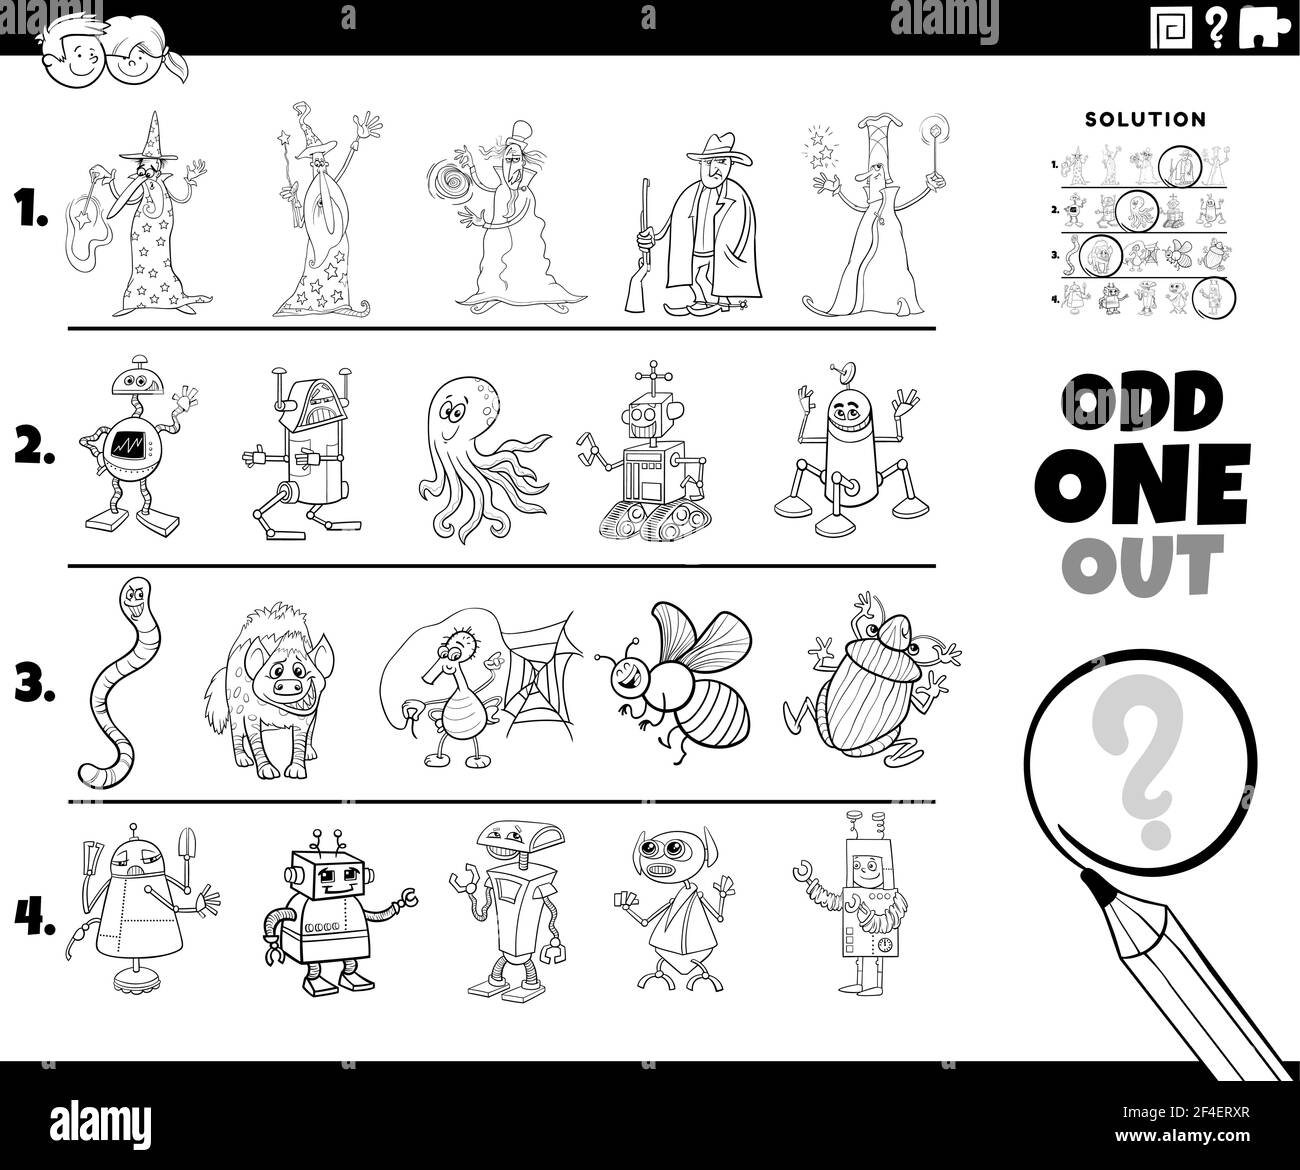 Black and White cartoon illustration of odd one out picture in a row educational game for elementary age or preschool children with comic characters c Stock Vector